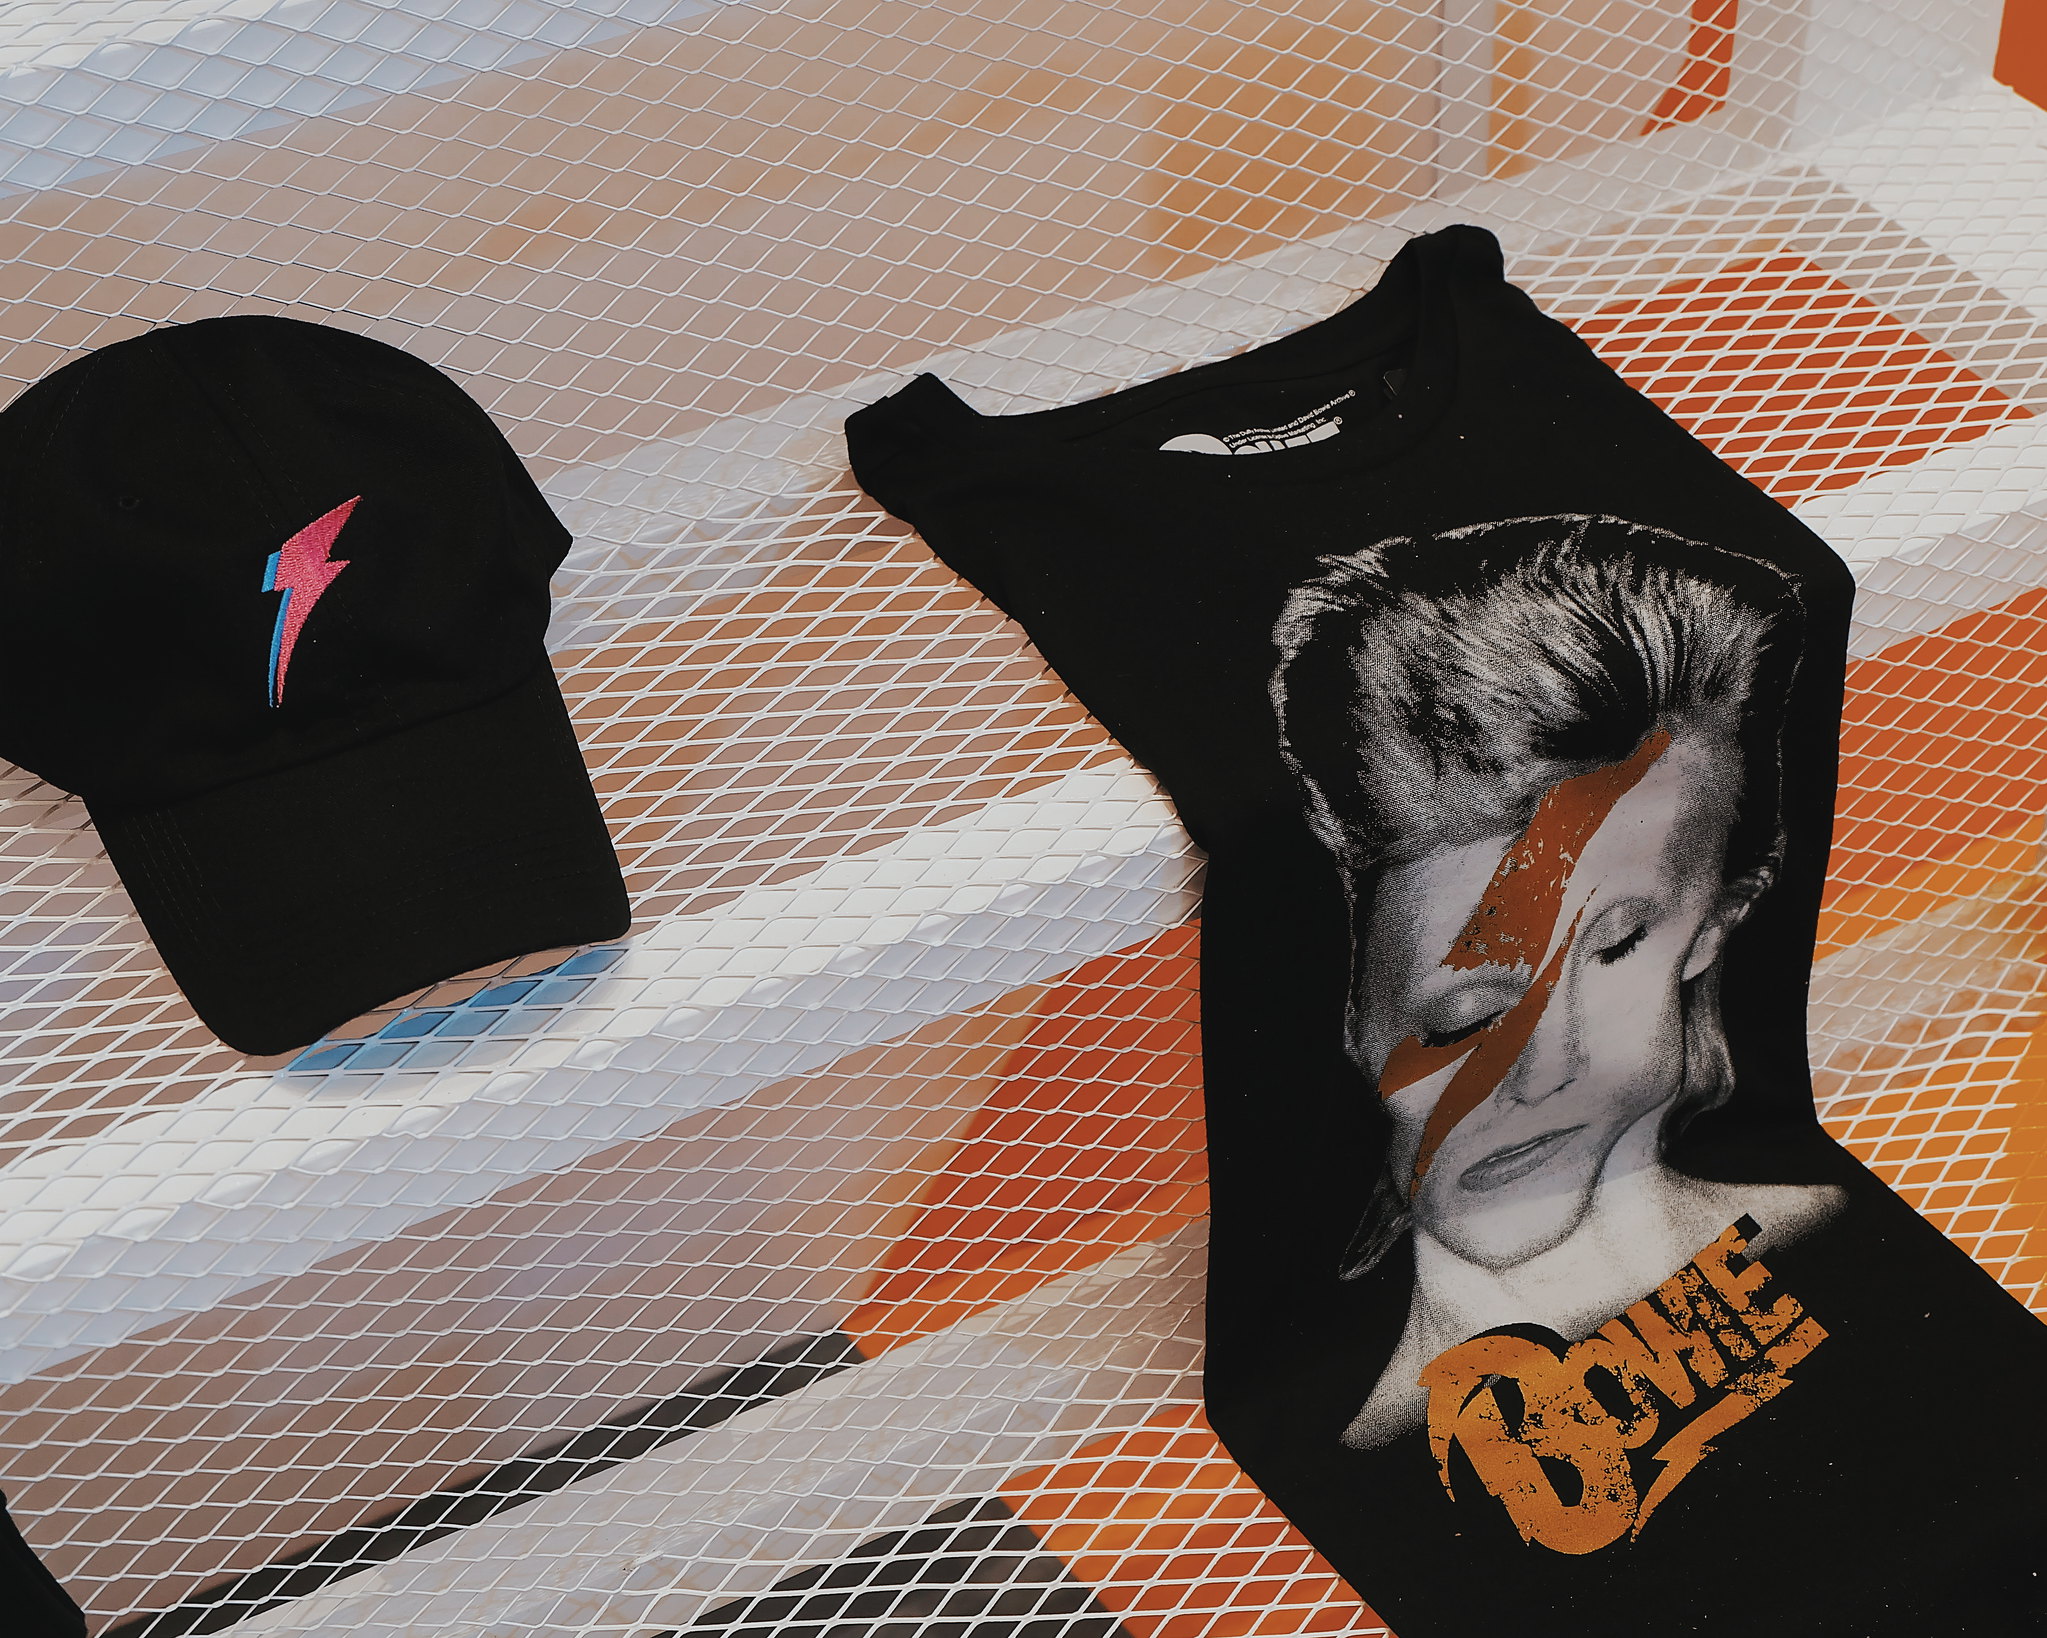 David Bowie, The Rolling Stones and RUn DMC x Oxygen 